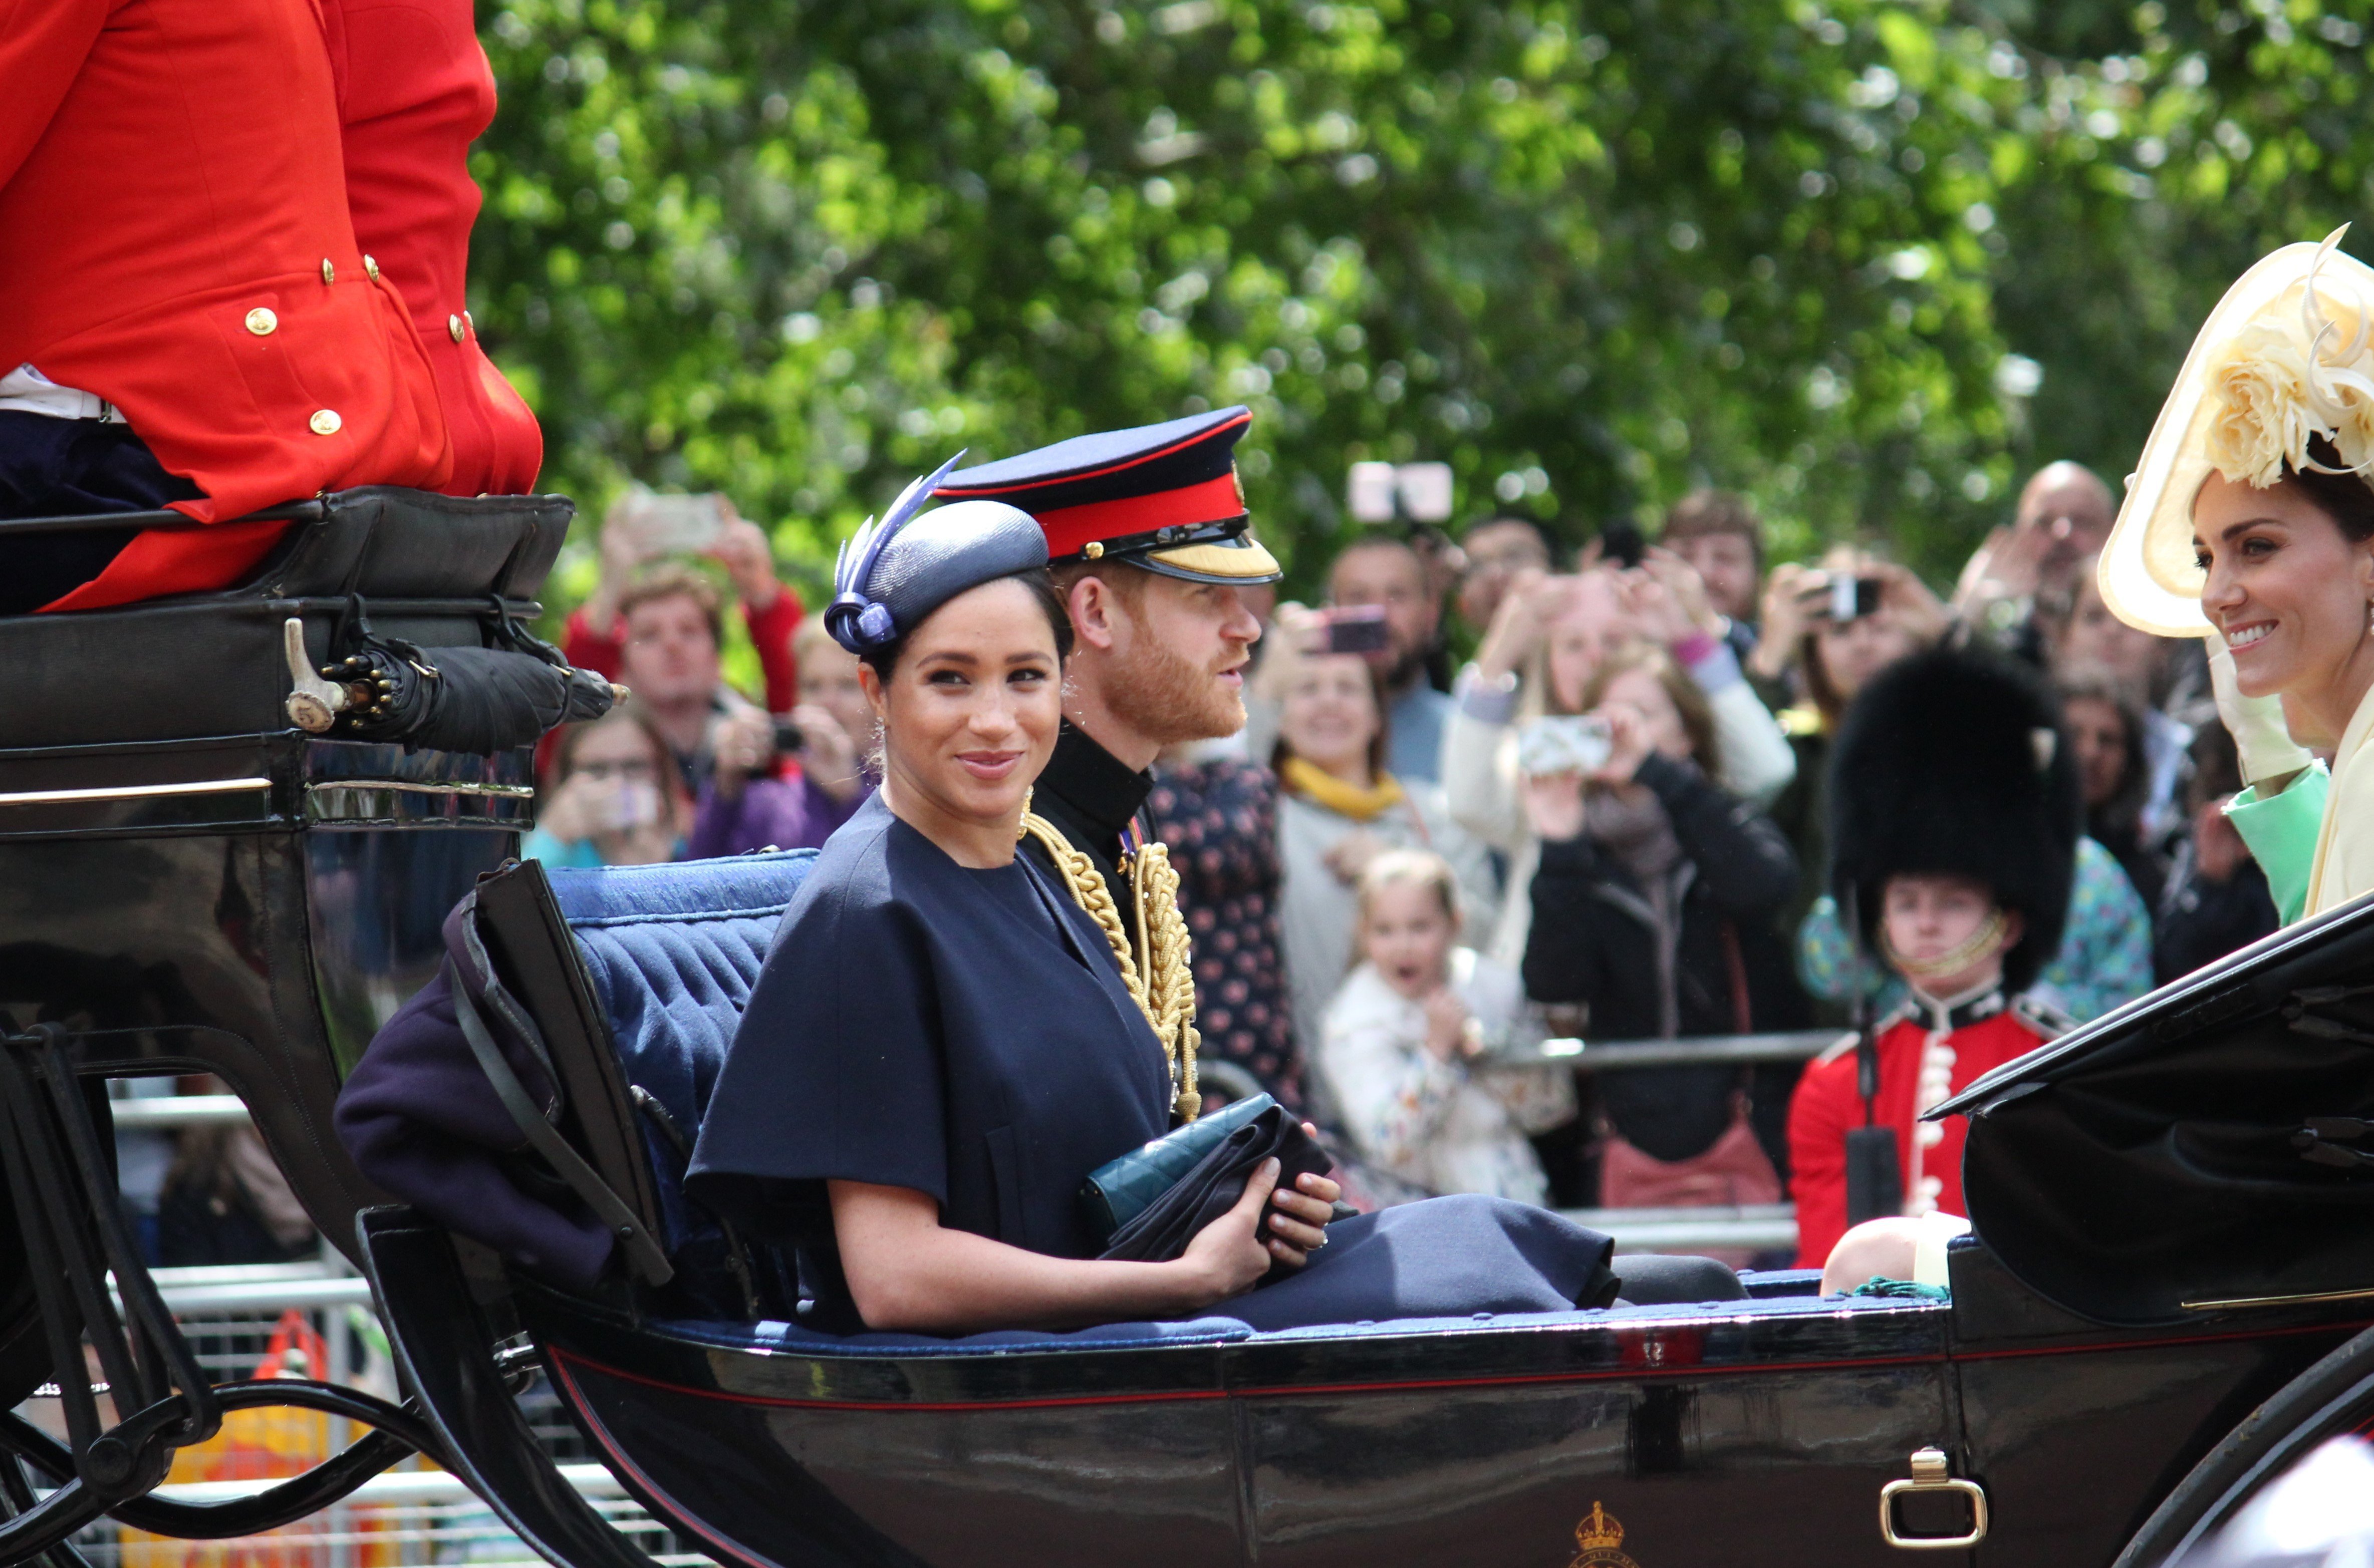 Meghan Markle, Prince Harry, and Kate Middleton arrive at Trooping the Color in June 2019 | Photo: Getty Images